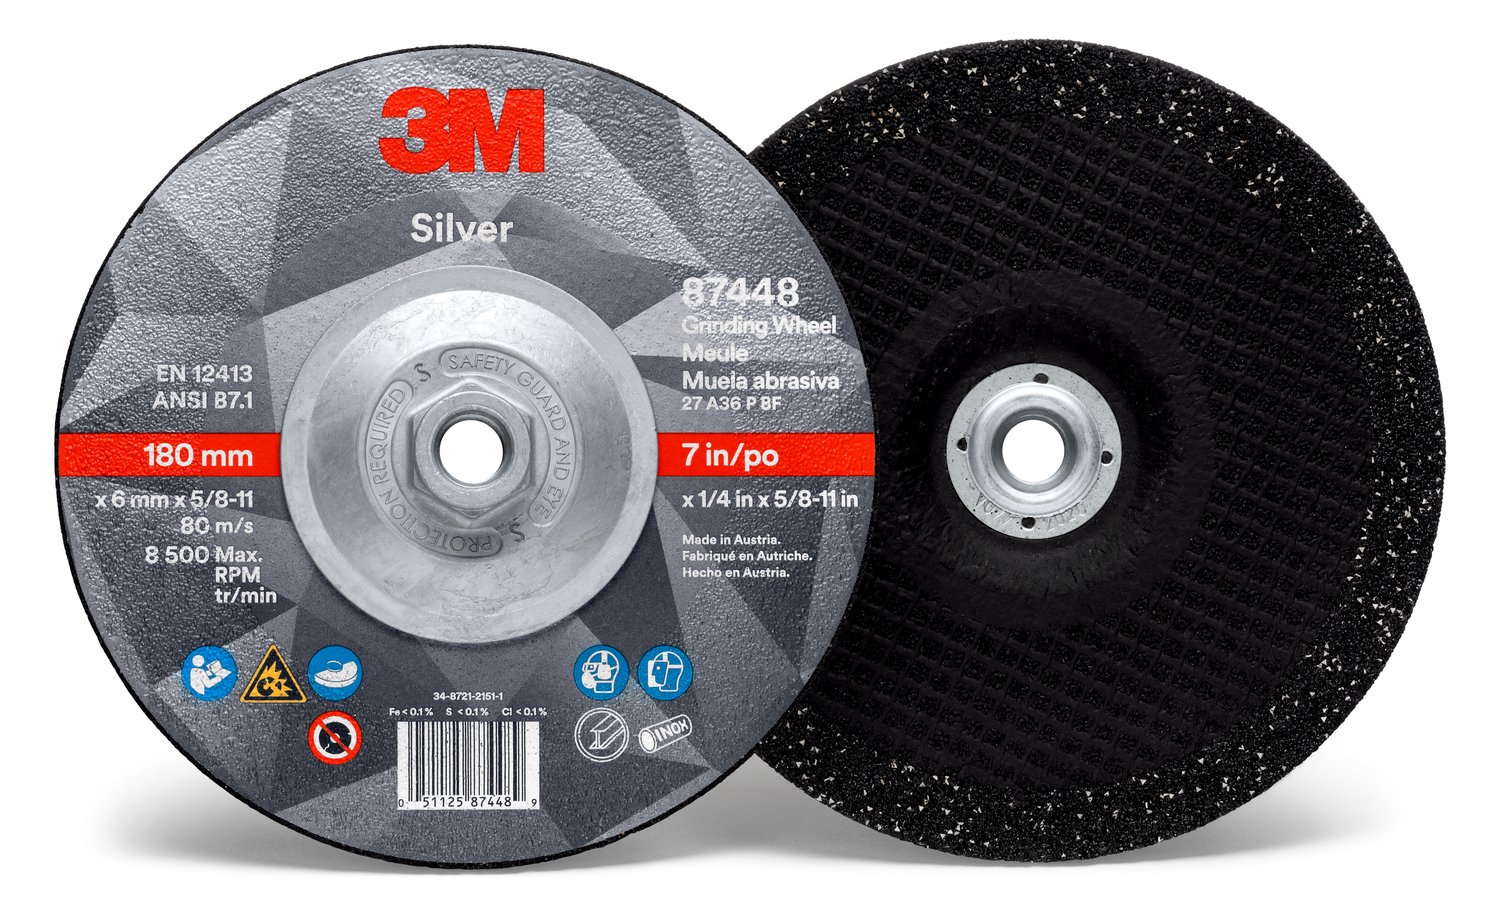 7010412150 - 3M Silver Depressed Center Grinding Wheel, 87448, T27 Quick Change, 7
in x 1/4 in x 5/8 in-11 in, 10/Carton, 20 ea/Case